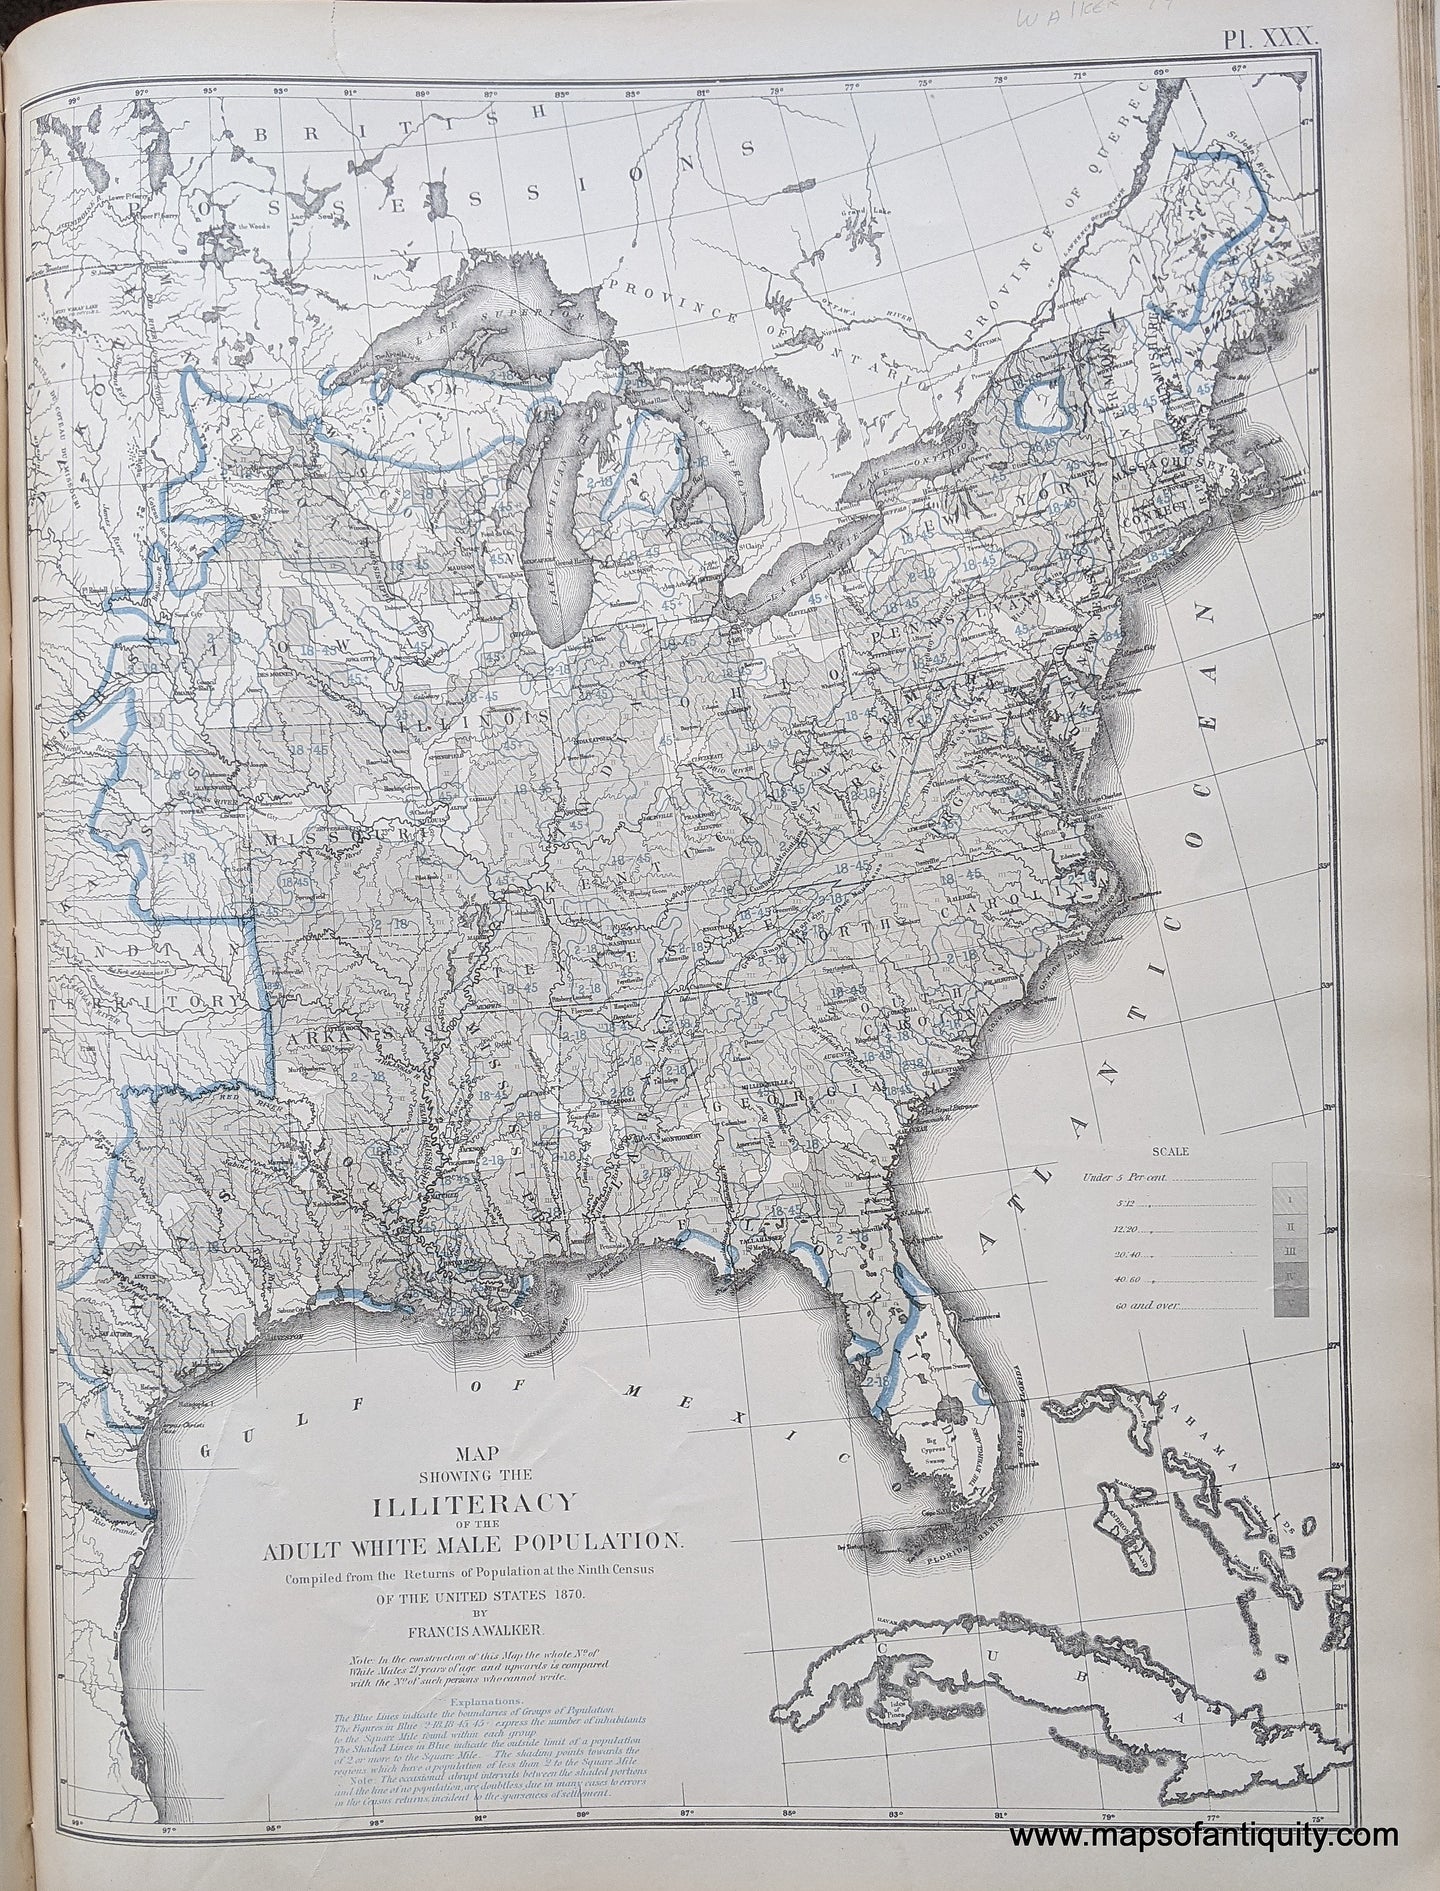 Genuine-Antique-Map-Map-Showing-the-Illiteracy-of-the-Adult-White-Male-Population-United-States--1874-Walker-/-Bien-Maps-Of-Antiquity-1800s-19th-century